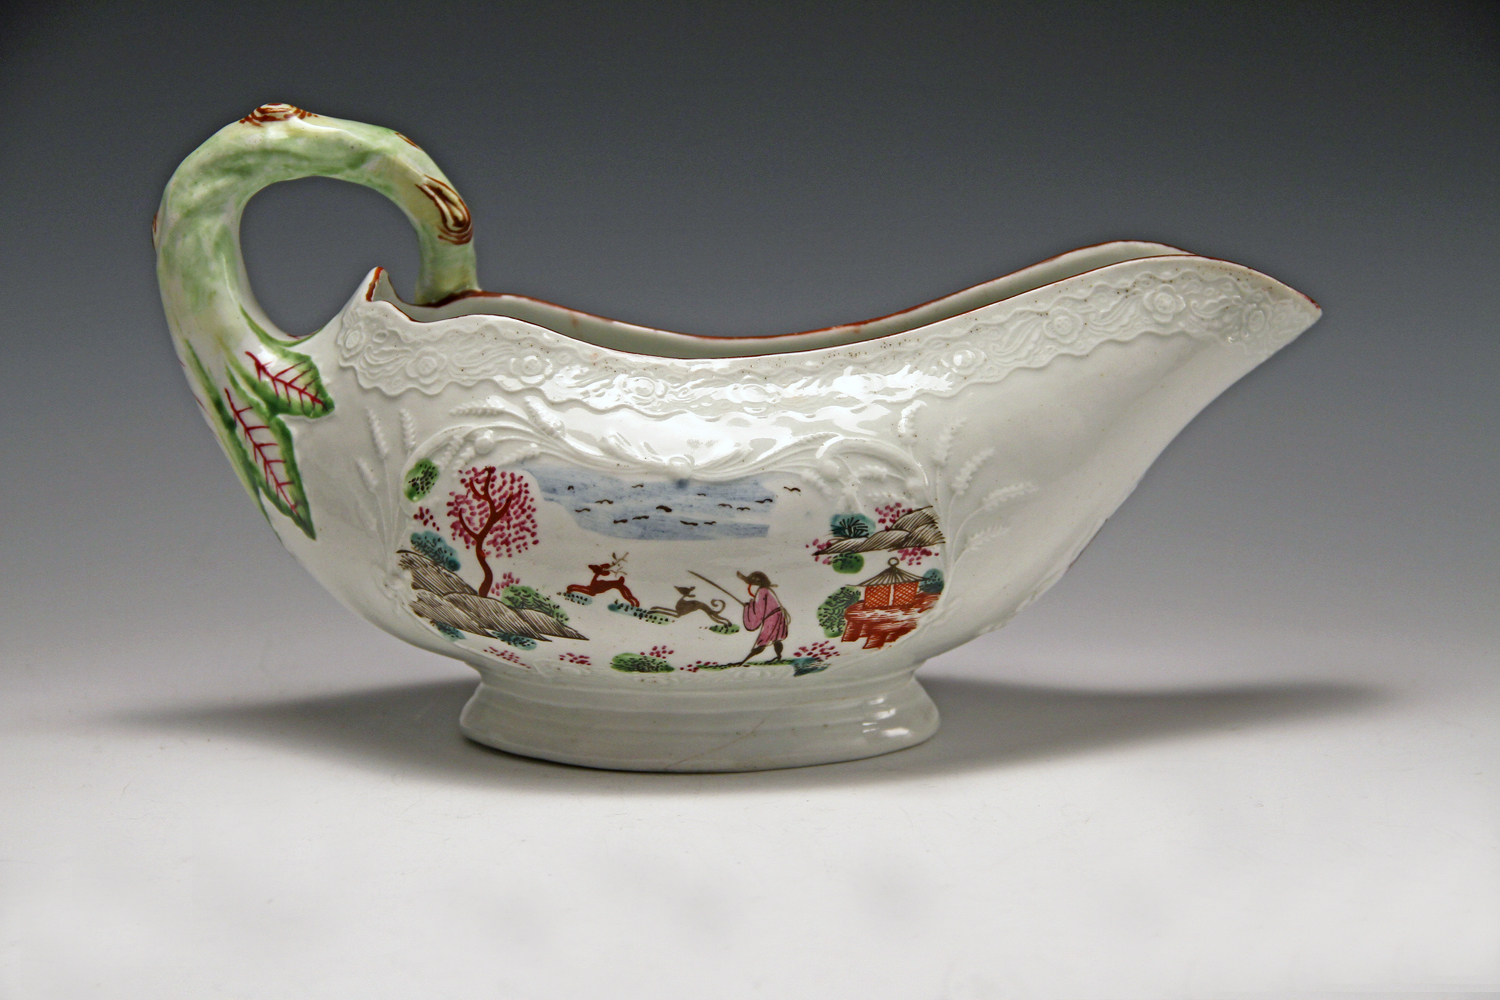 1037 - Very rare Worcester polychrome sauceboat with the "staghunt pattern" c 1755